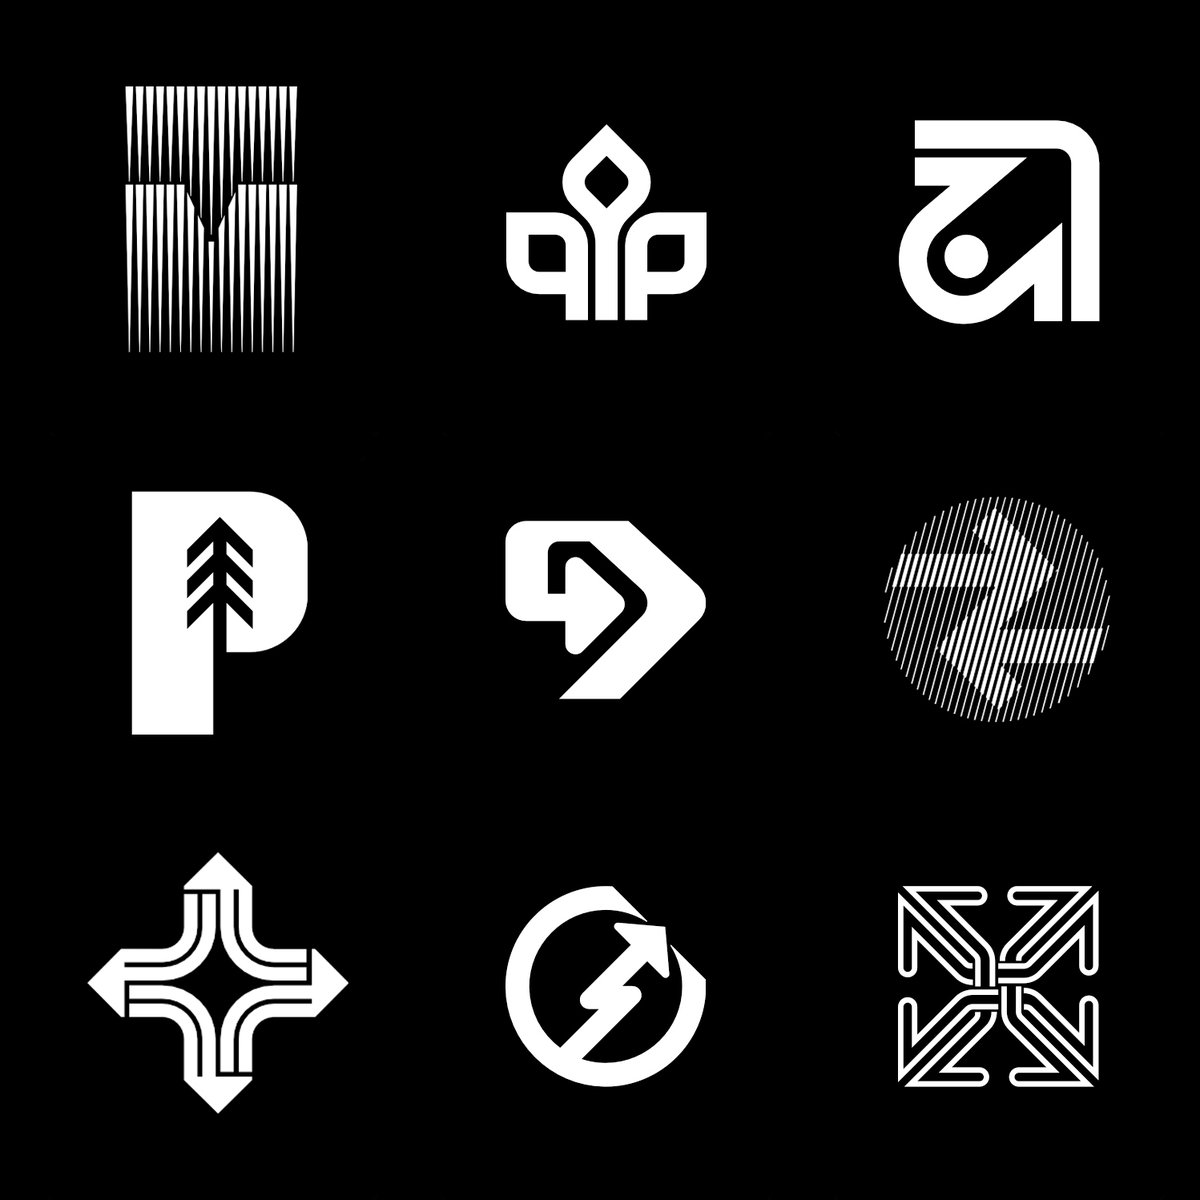 Some of the historical logos digitised and added to LogoArchive over the last two weeks. See over 4000 more at logo-archive.org #logos #design #graphicdesign #logoarchive